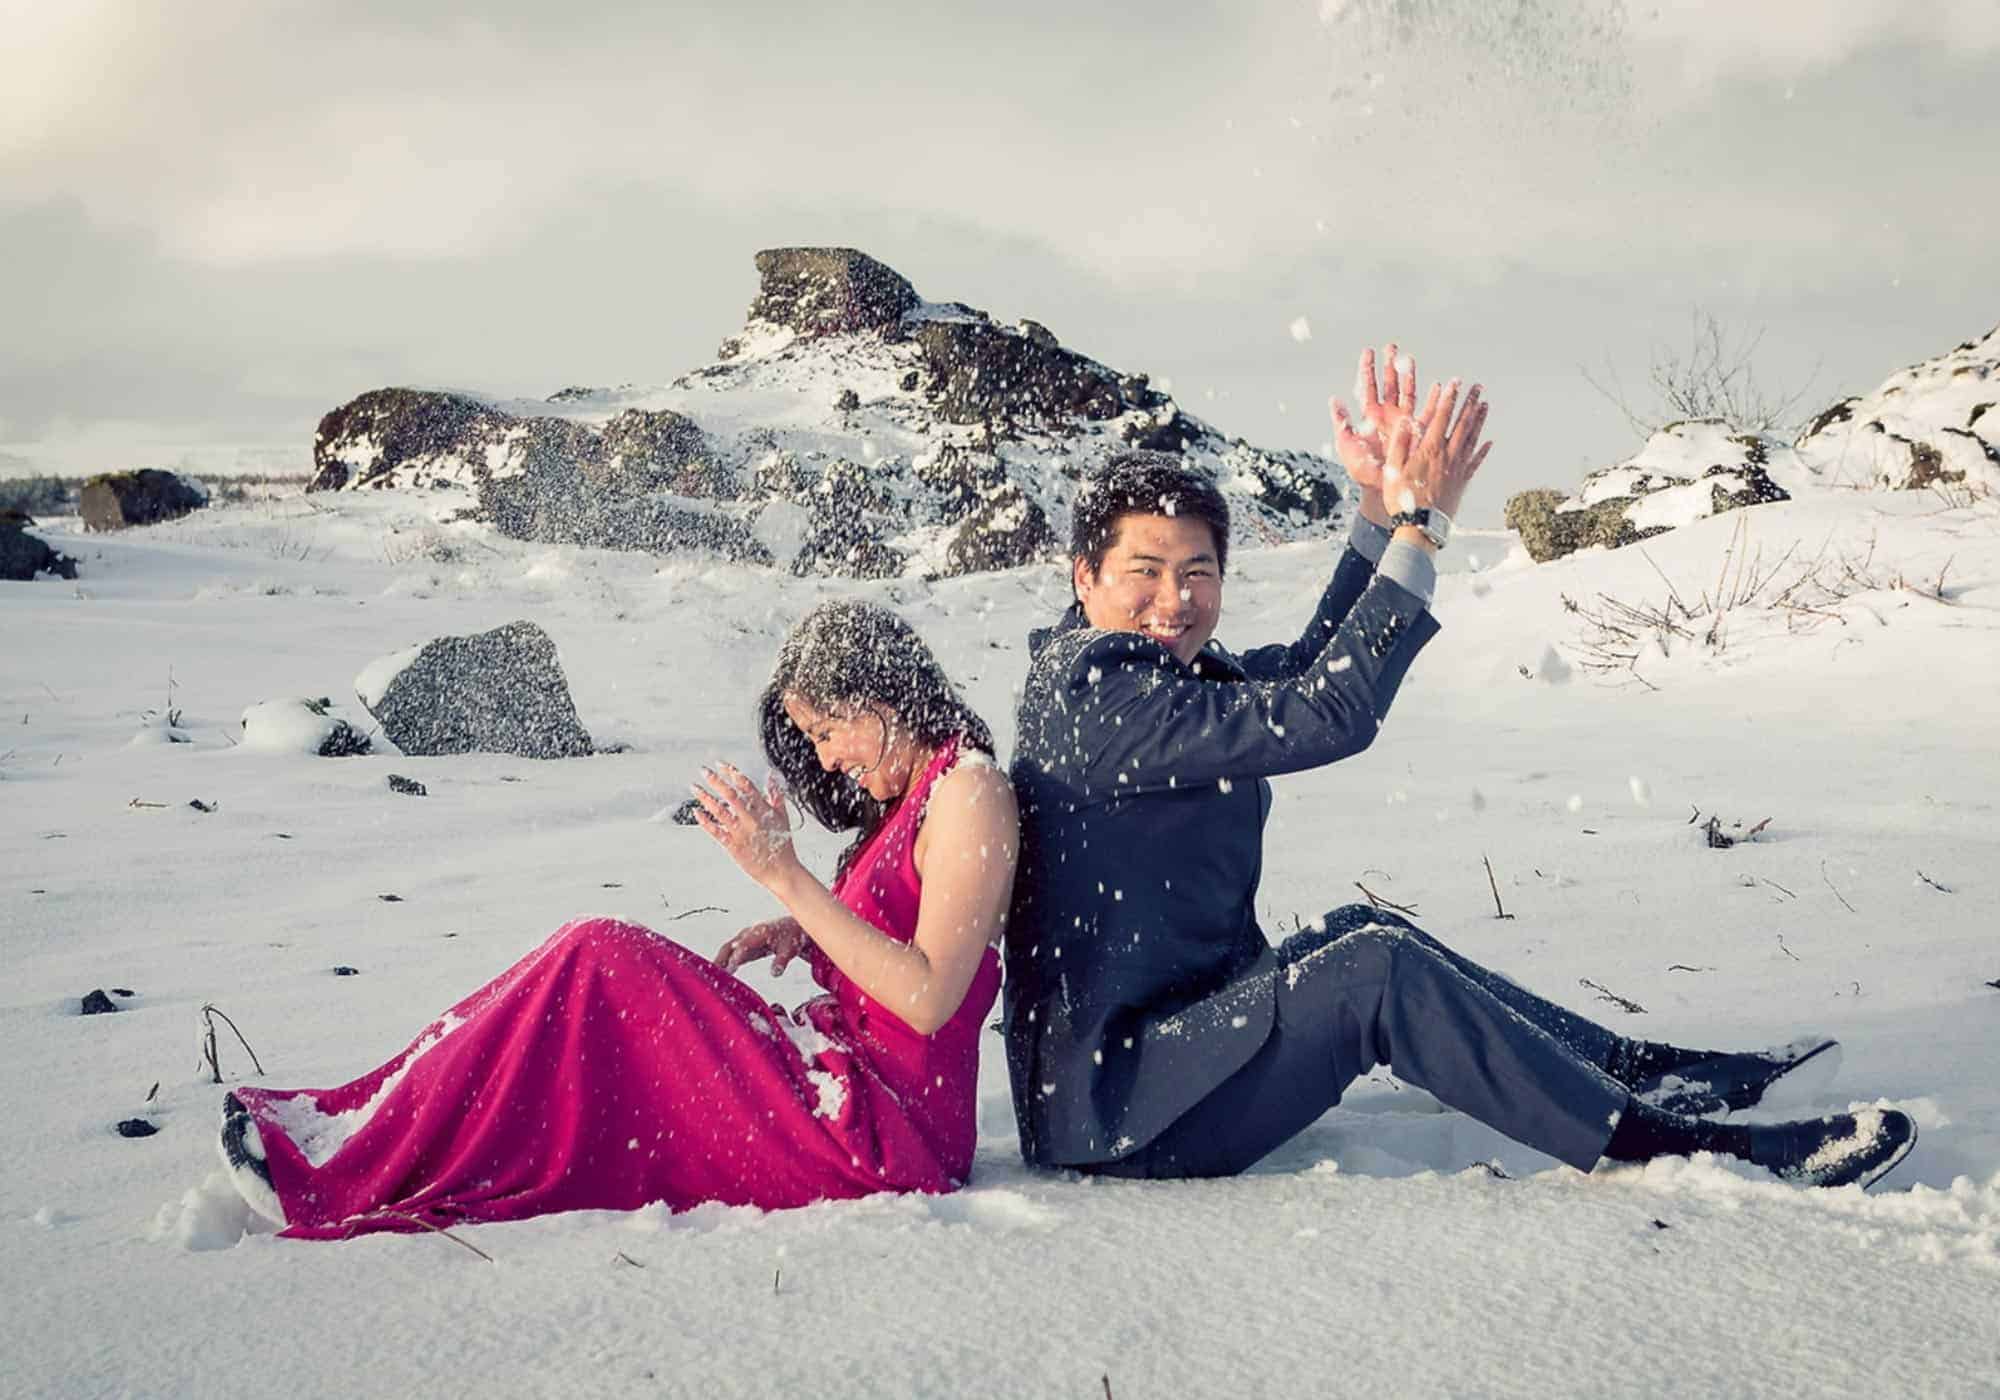 Bride wearing pink dress and groom wearing suit sit back to back on the snowy ground and toss snow overhead.